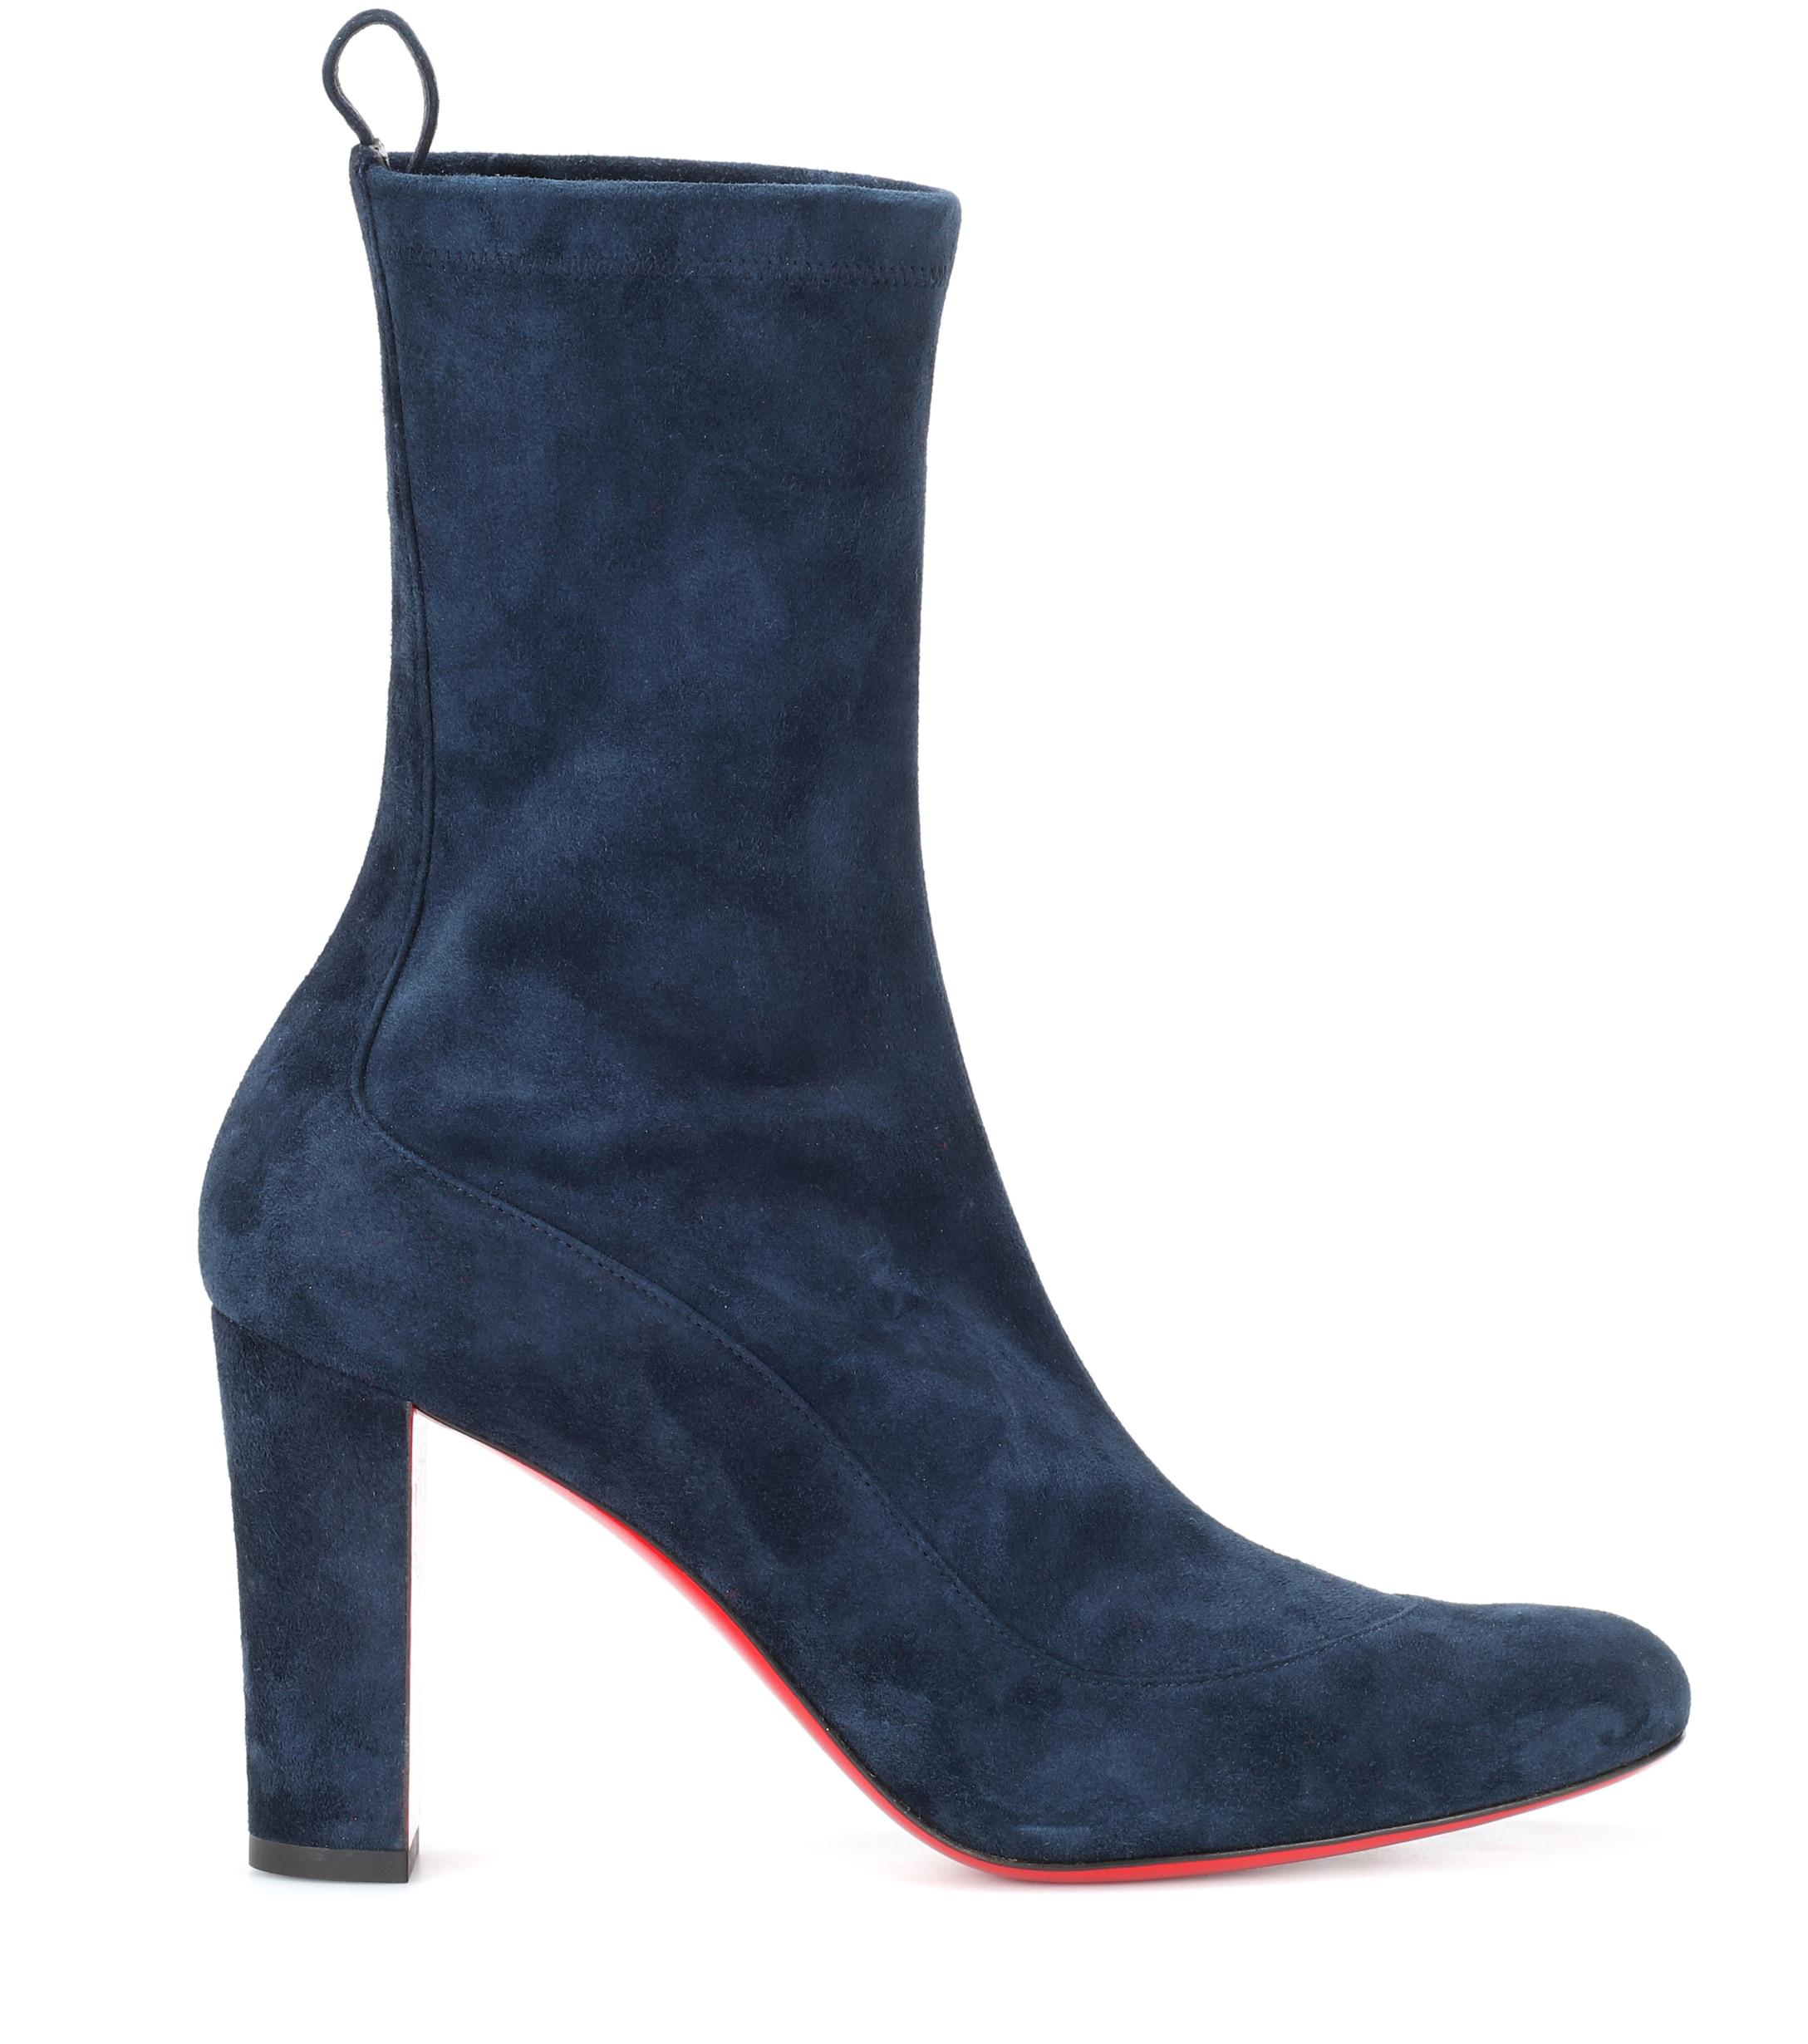 Christian Louboutin Gena 85 Suede Ankle Boots in Blue - Lyst